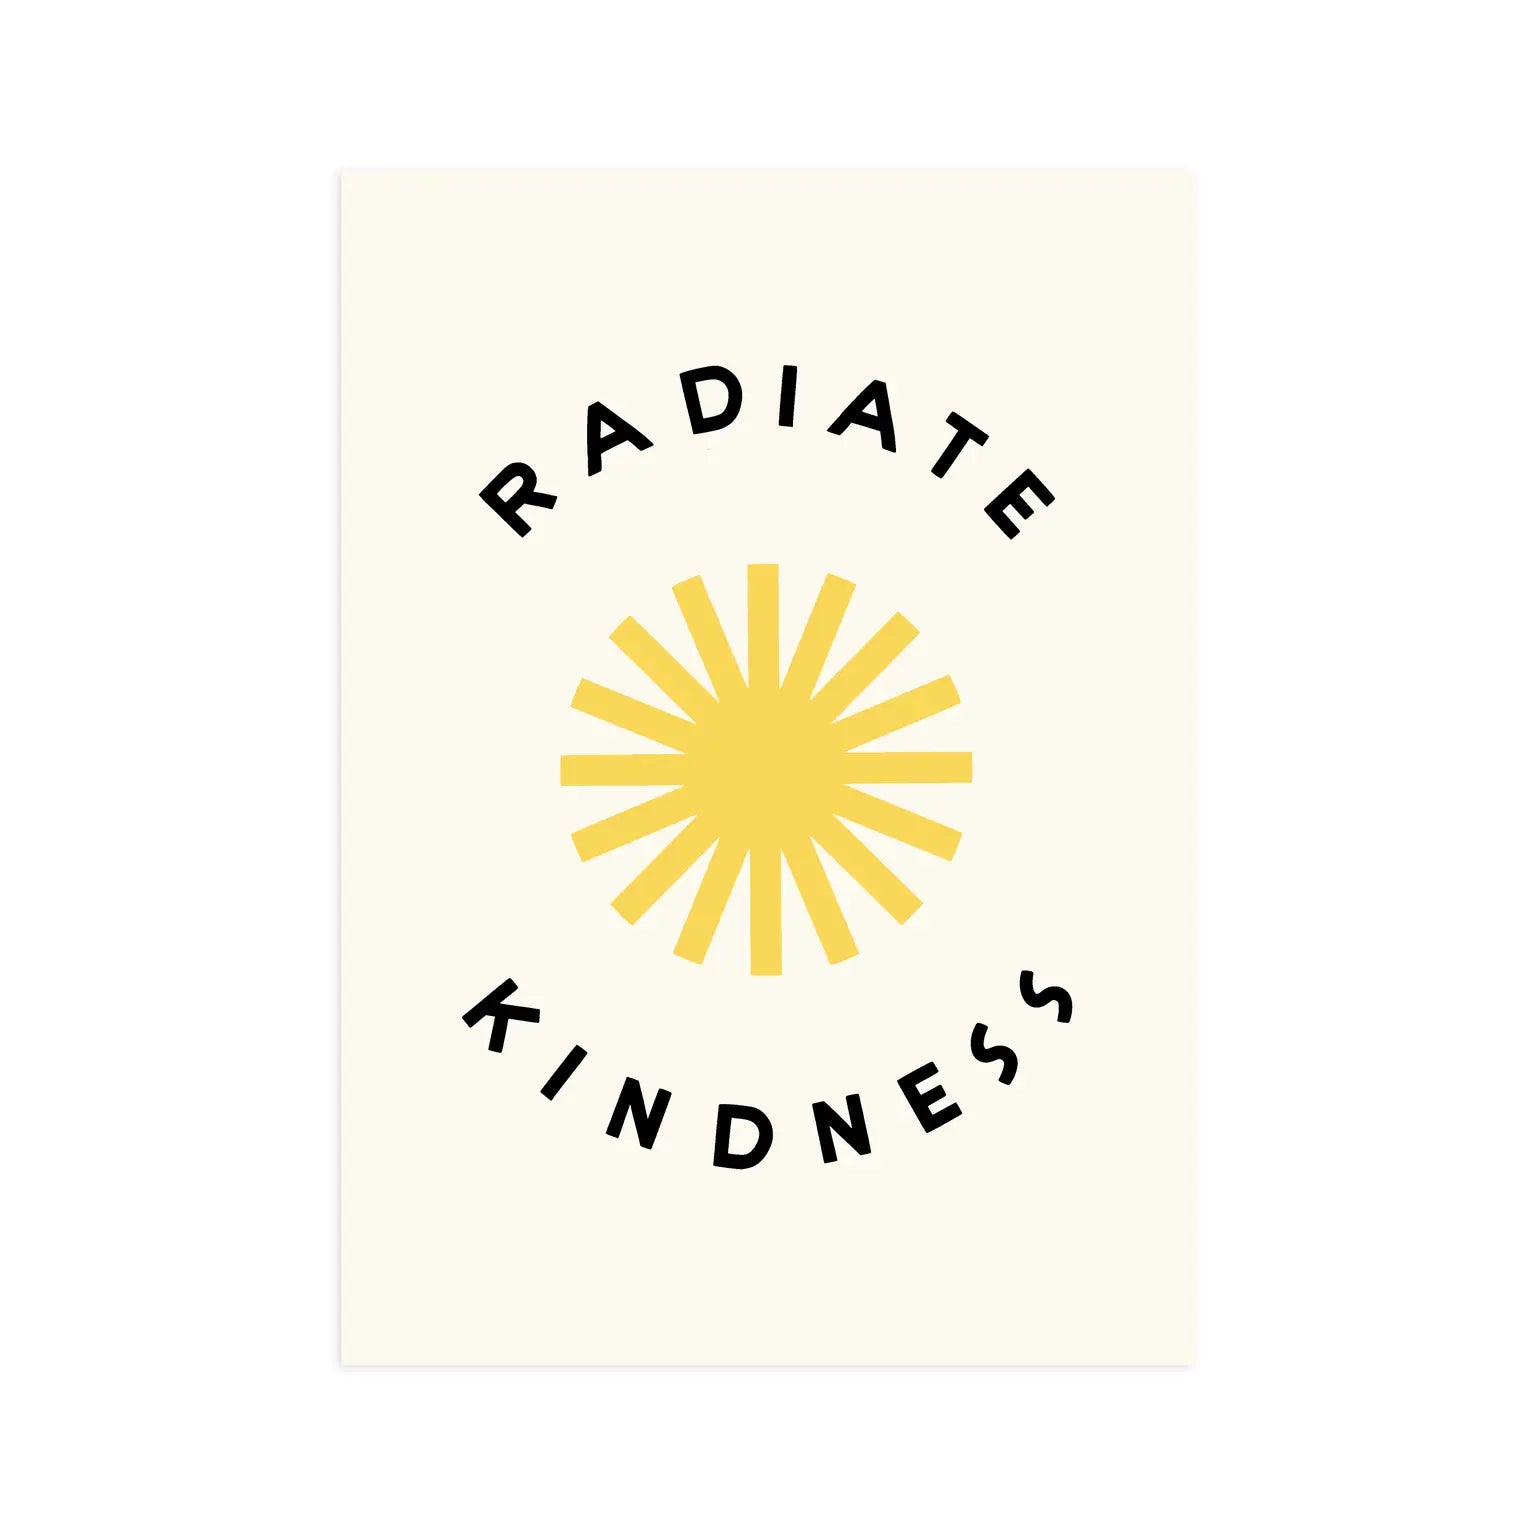 Cream white background. Black text reads "radiate kindness." Yellow sun drawing. 